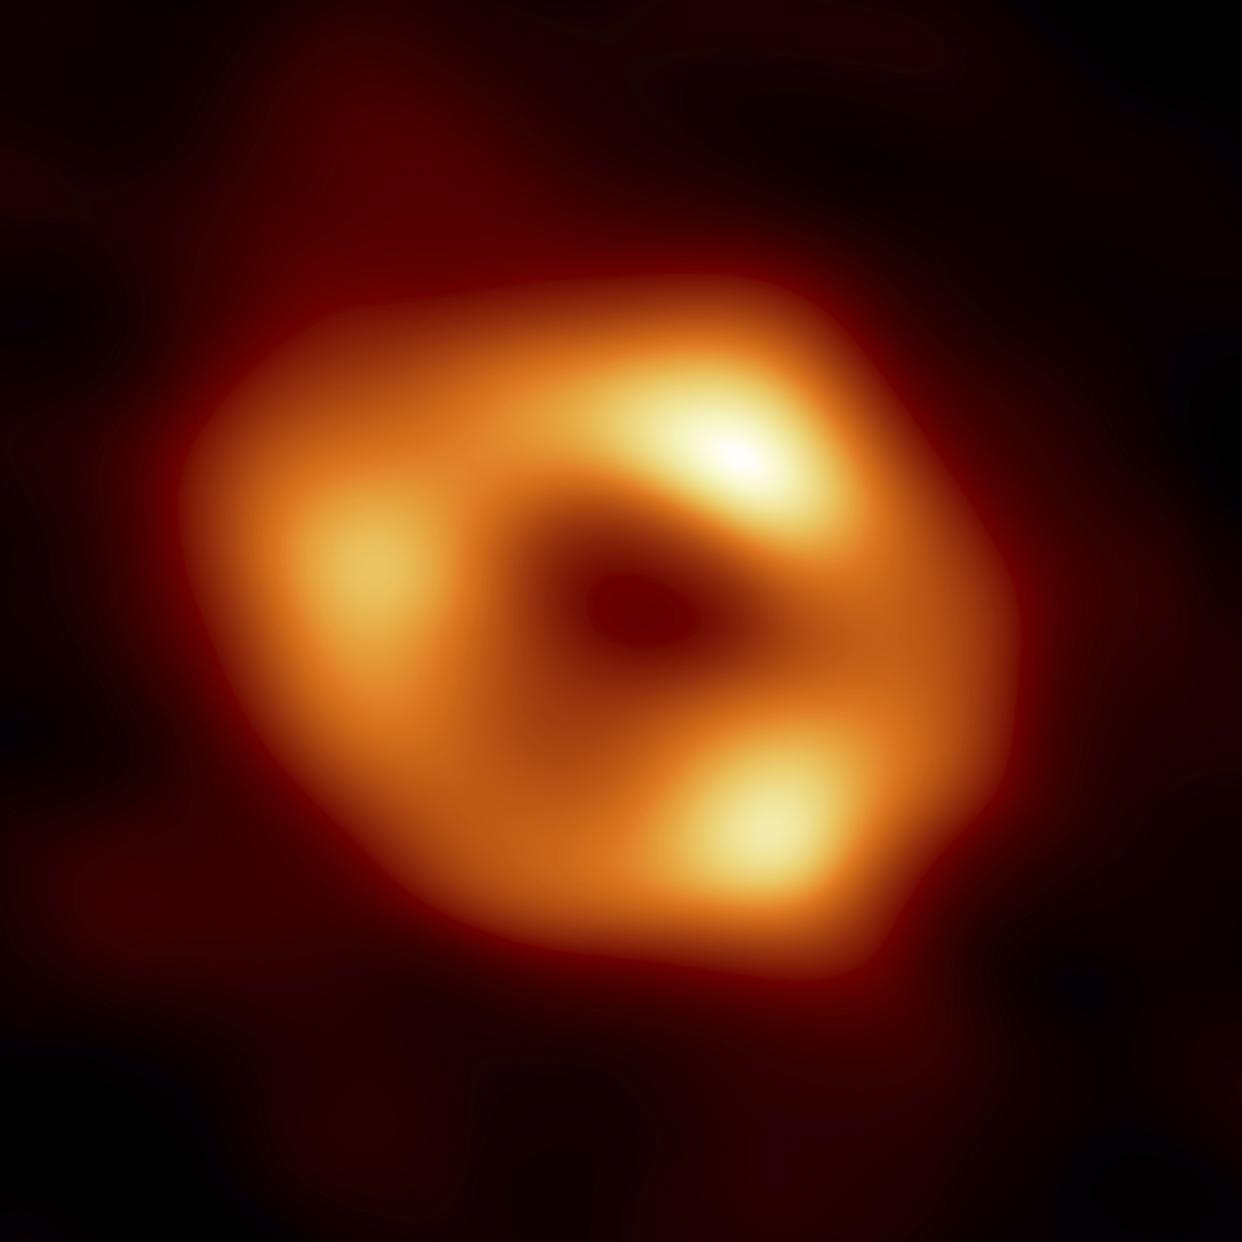 This image released by the Event Horizon Telescope Collaboration, Thursday, May 12, 2022, shows a black hole at the center of our Milky Way galaxy. 